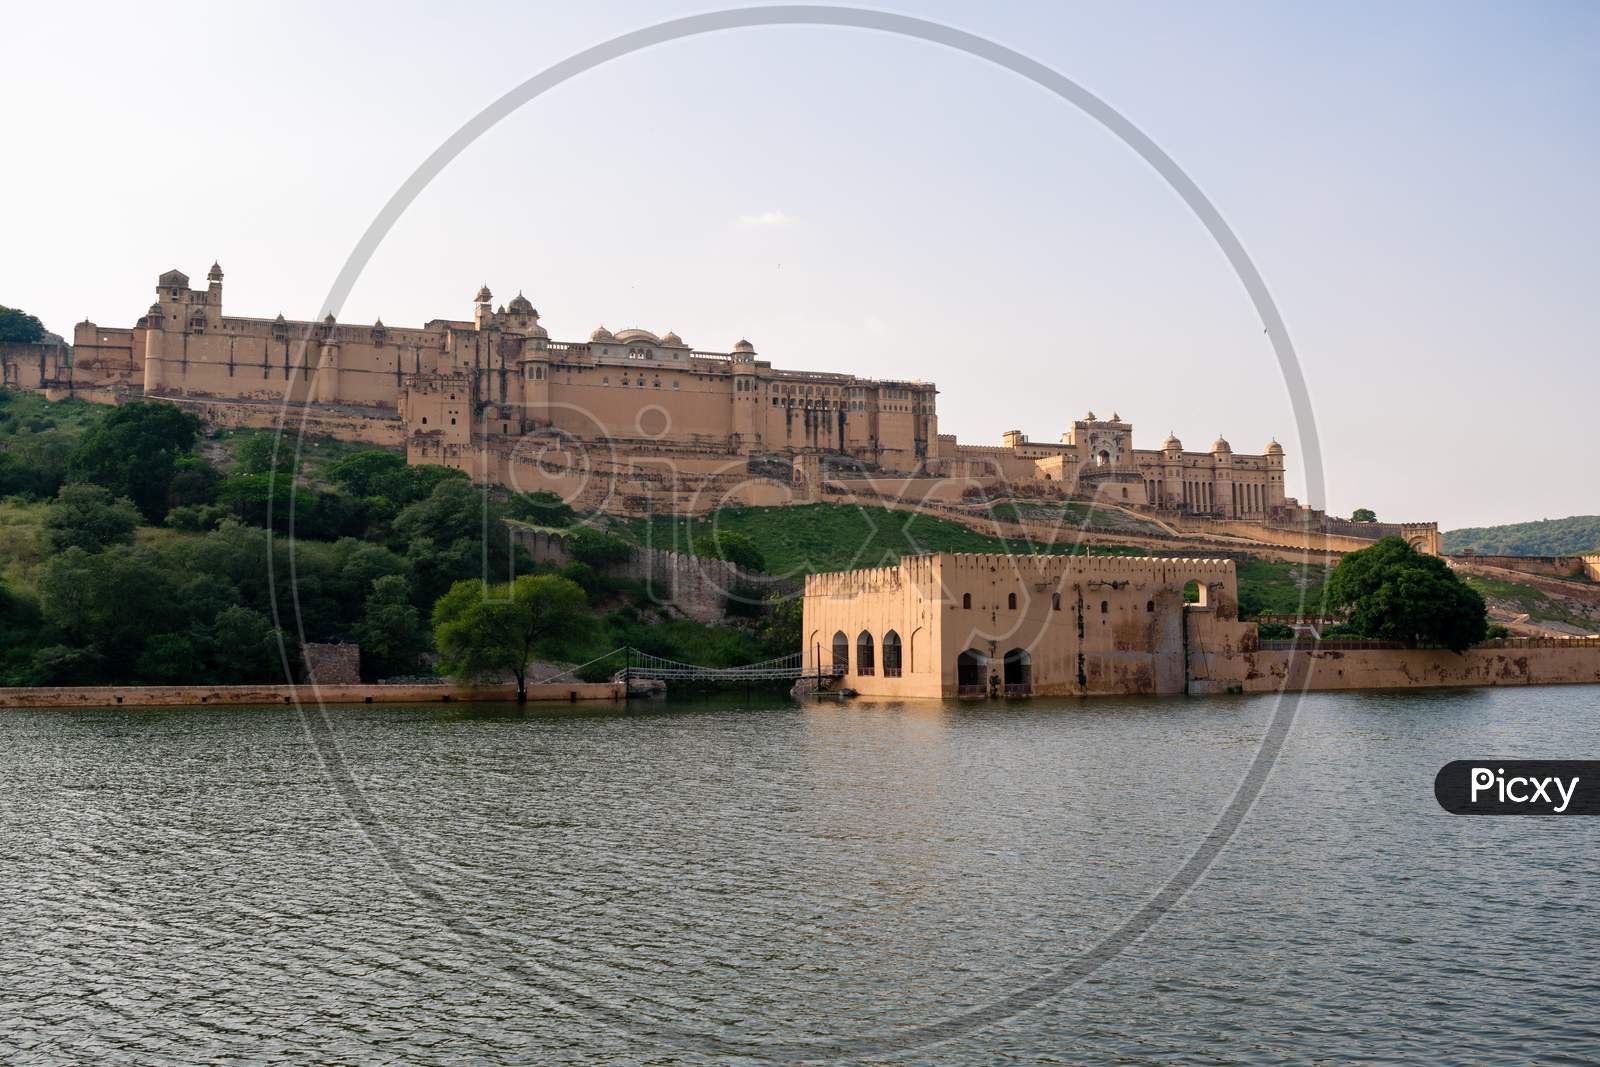 Maotha lake in front of Amer fort or Amber fort, Jaipur